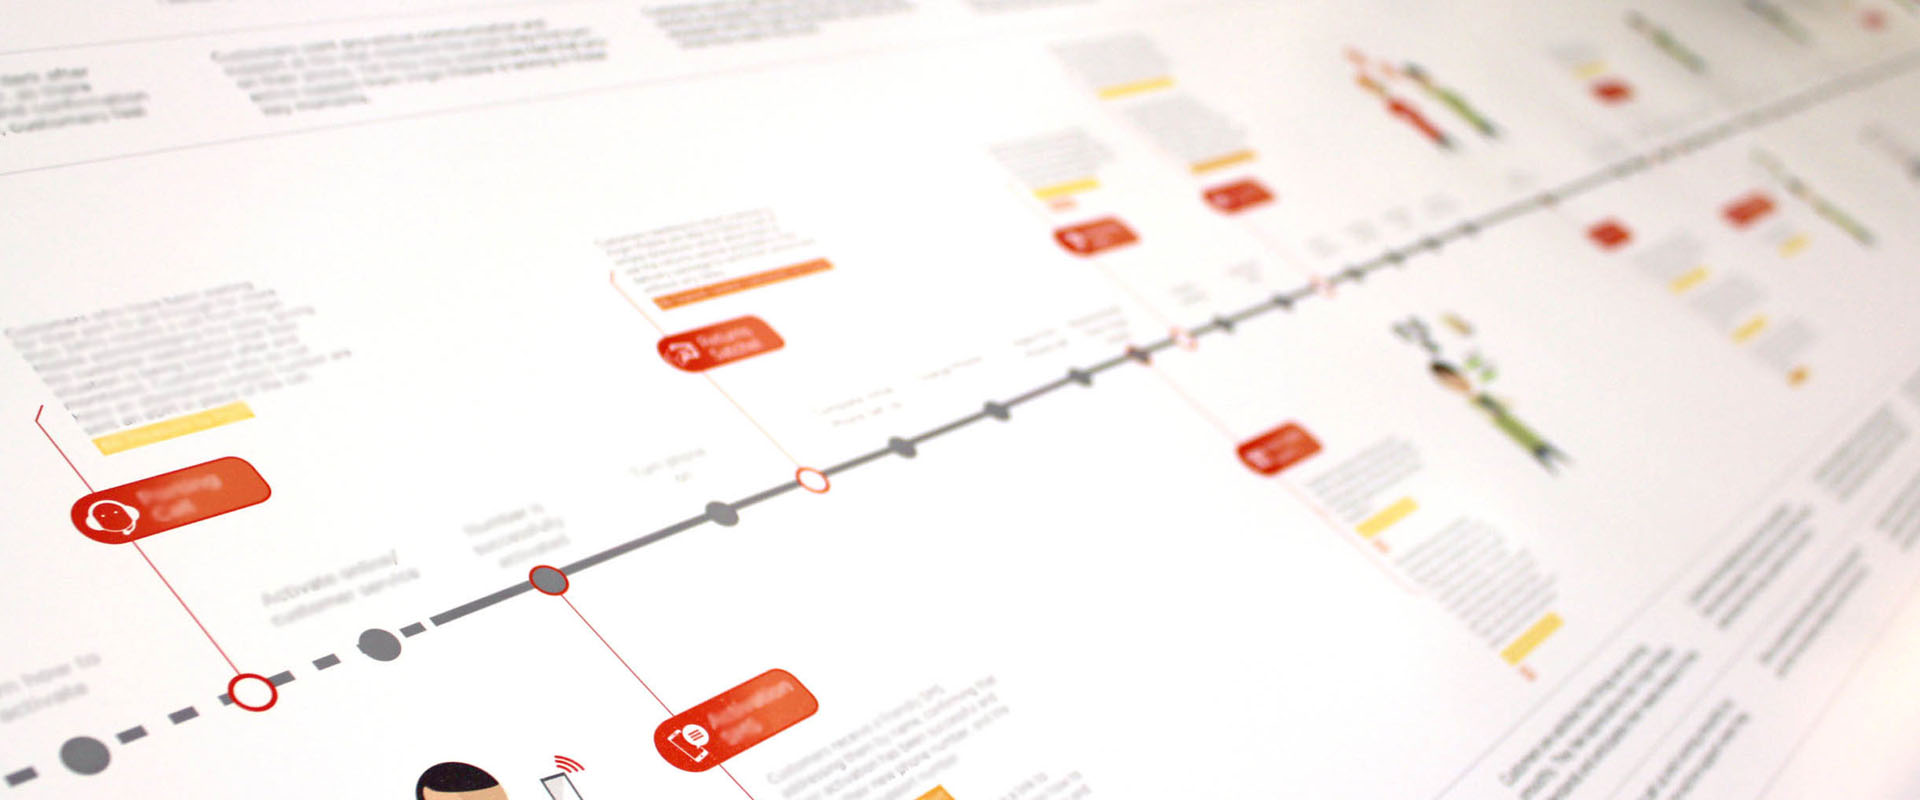 Repeat - Detail of a Customer Journey Map